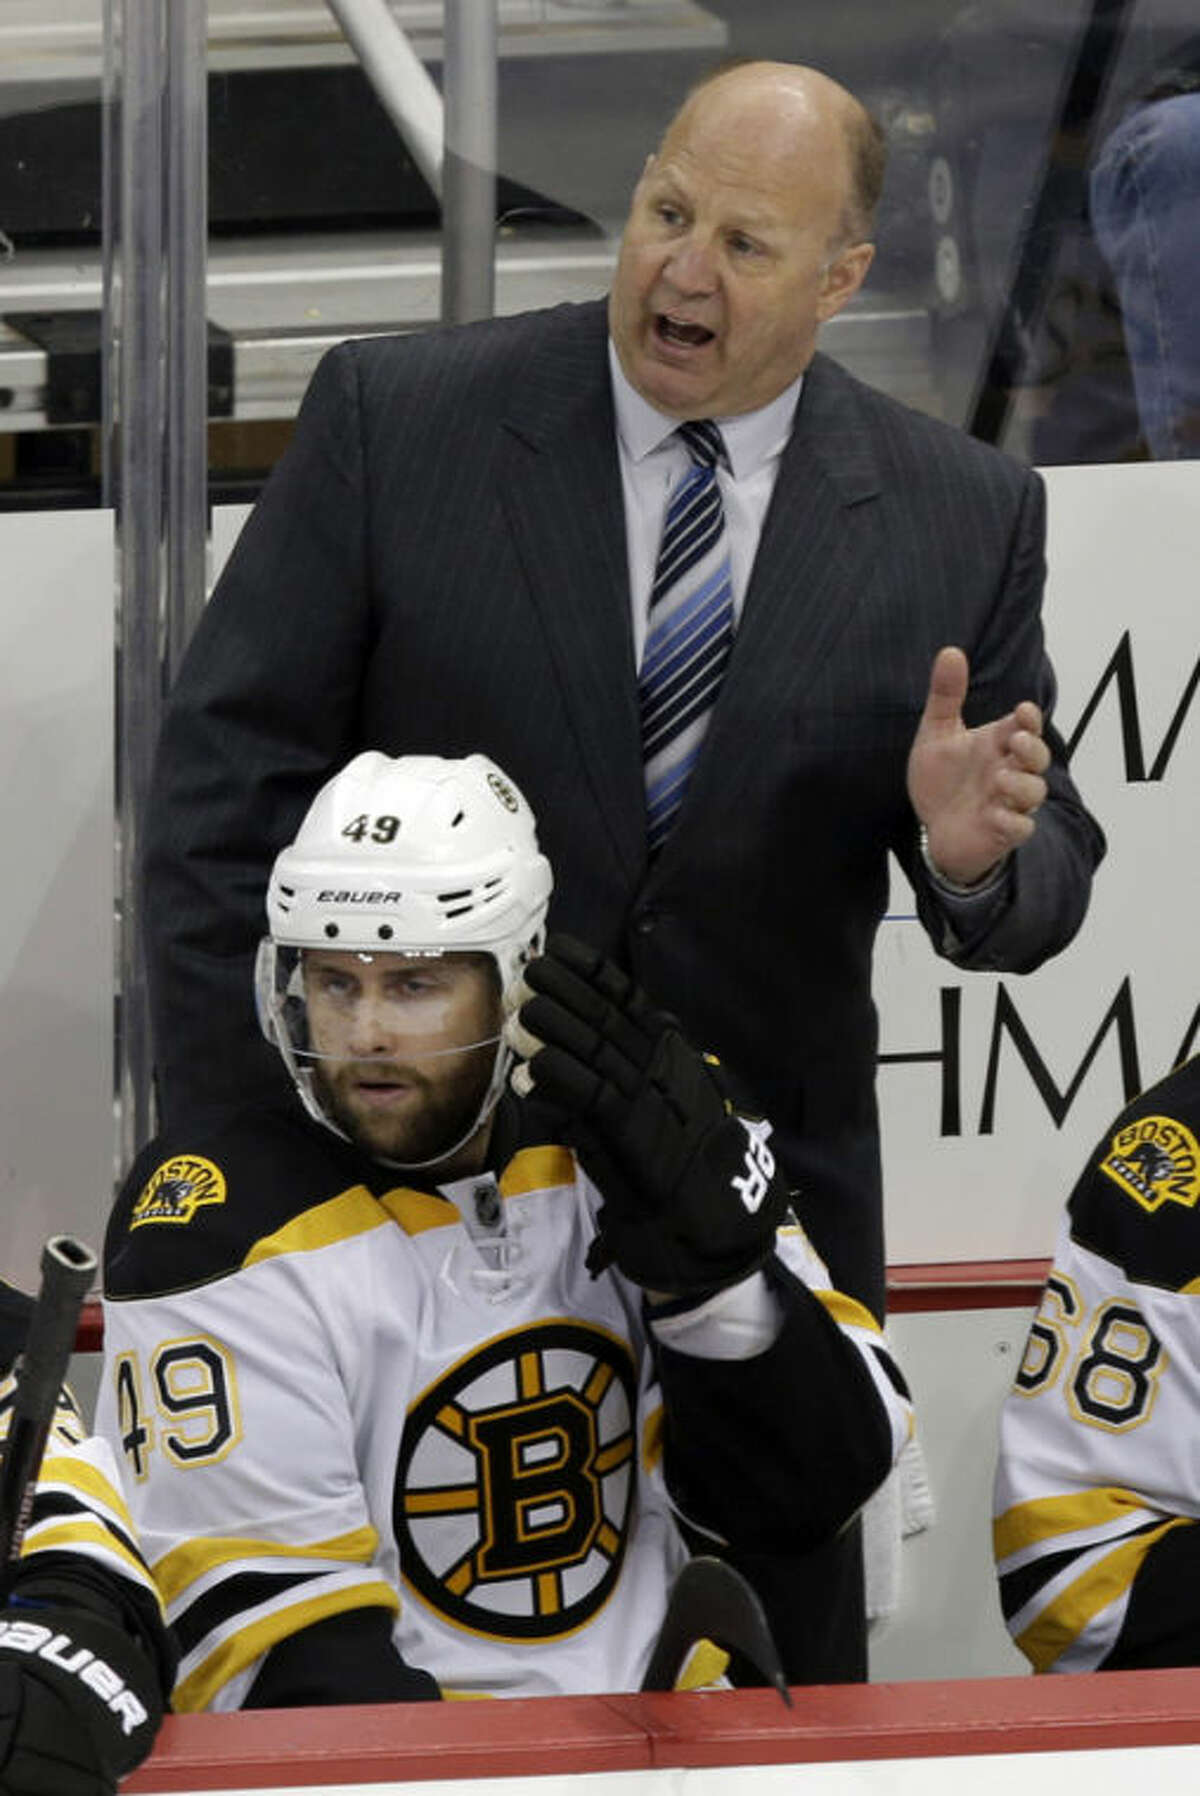 Boston Bruins coach Claude Julien stands behind Rich Peverley (49) in the third period of Game 2 of the NHL hockey Stanley Cup playoffs Eastern Conference finals in Pittsburgh Monday, June 3, 2013. The Bruins defeated the Pittsburgh Penguins 6-1. (AP Photo/Gene J. Puskar)